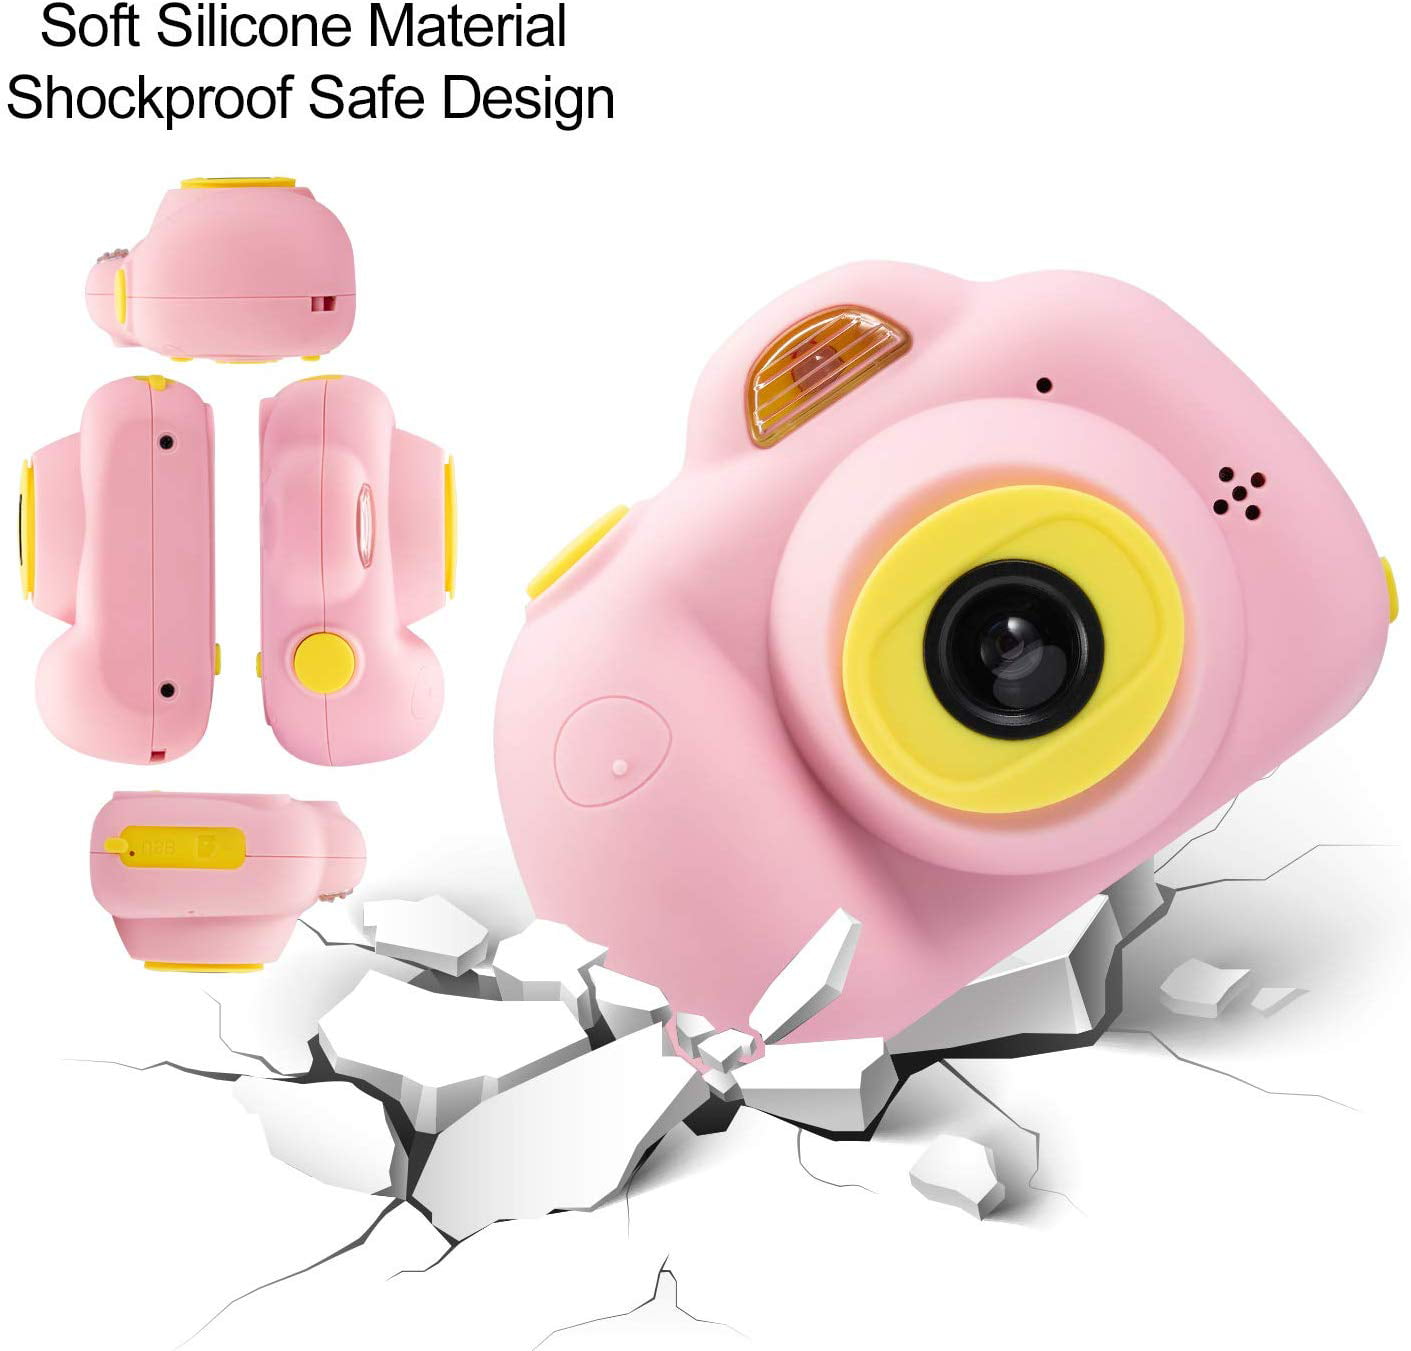 Double Gs Kids Camera Gifts for 4-8 Years Old Shockproof Cameras Great Gift Mini Child Camcorder for Little Girl with Soft Silicone Shell for Outdoor Play,Pink 16GB Memory Card Included Red 